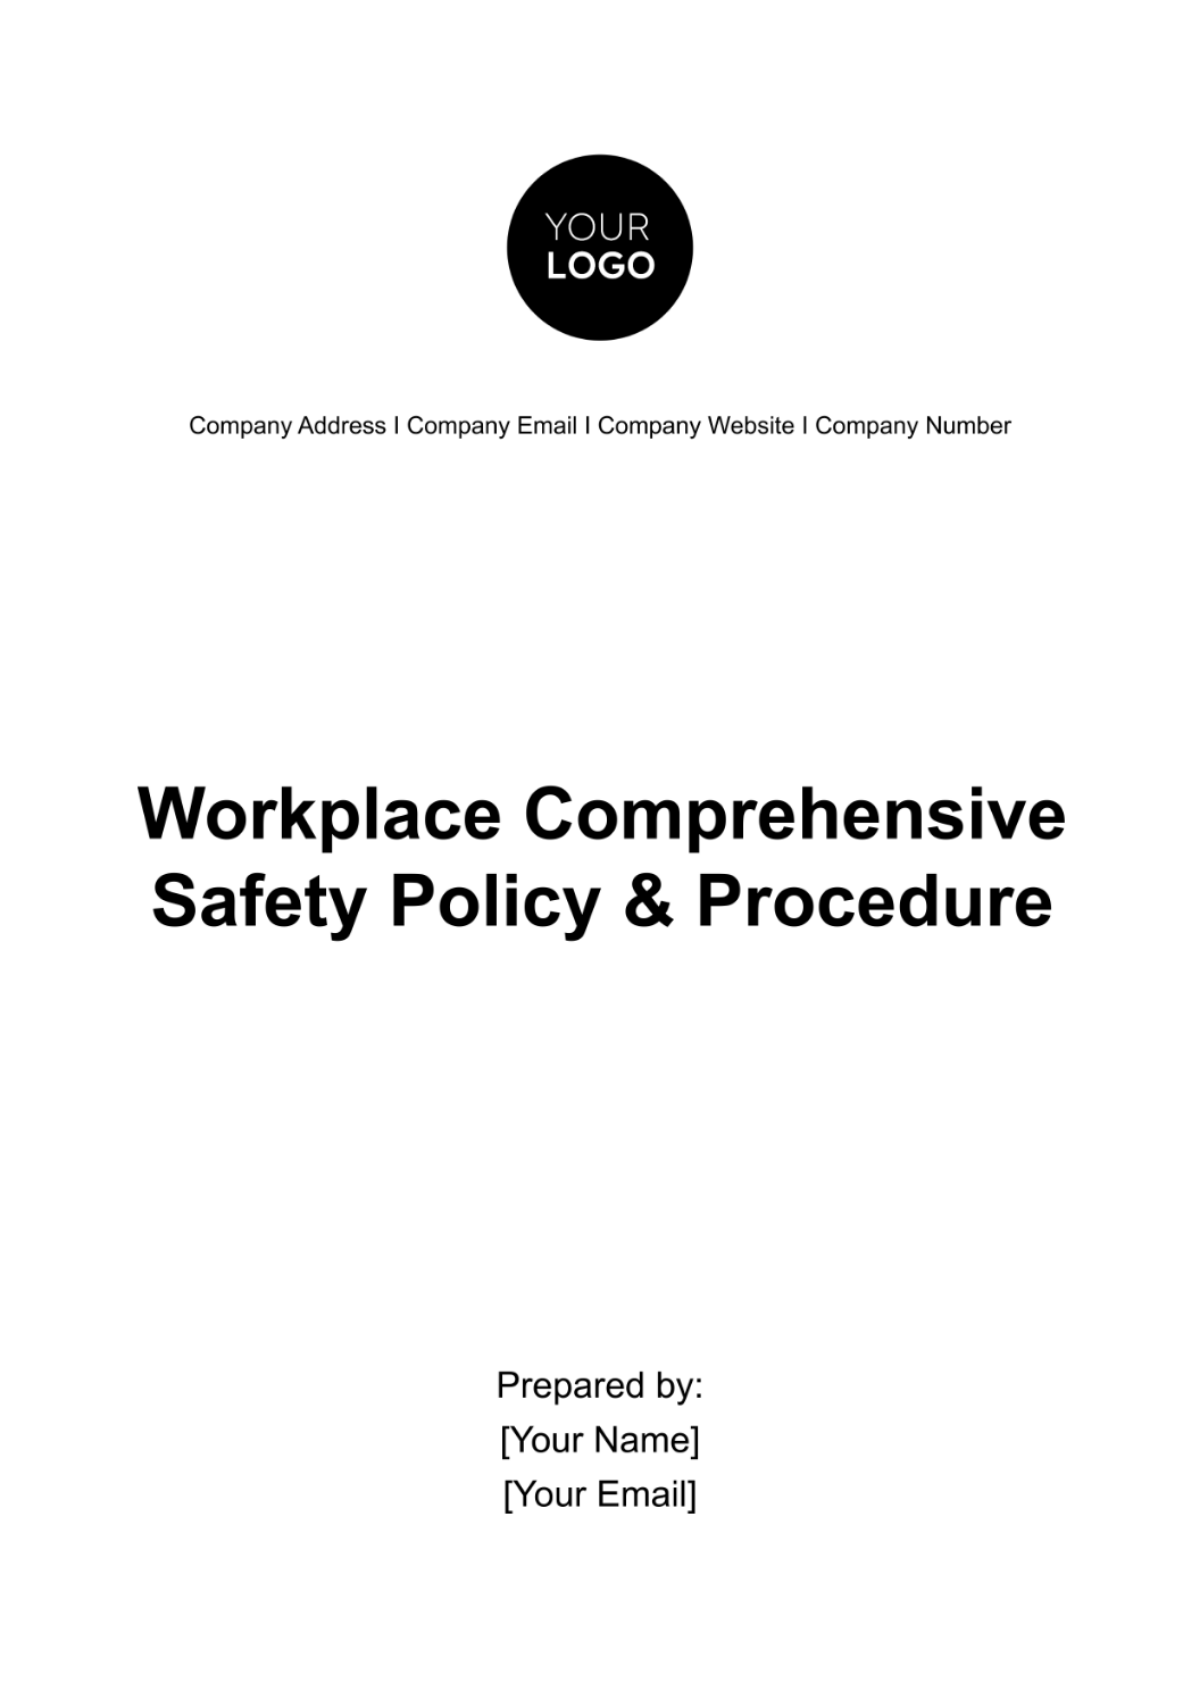 Workplace Comprehensive Safety Policy & Procedure Template